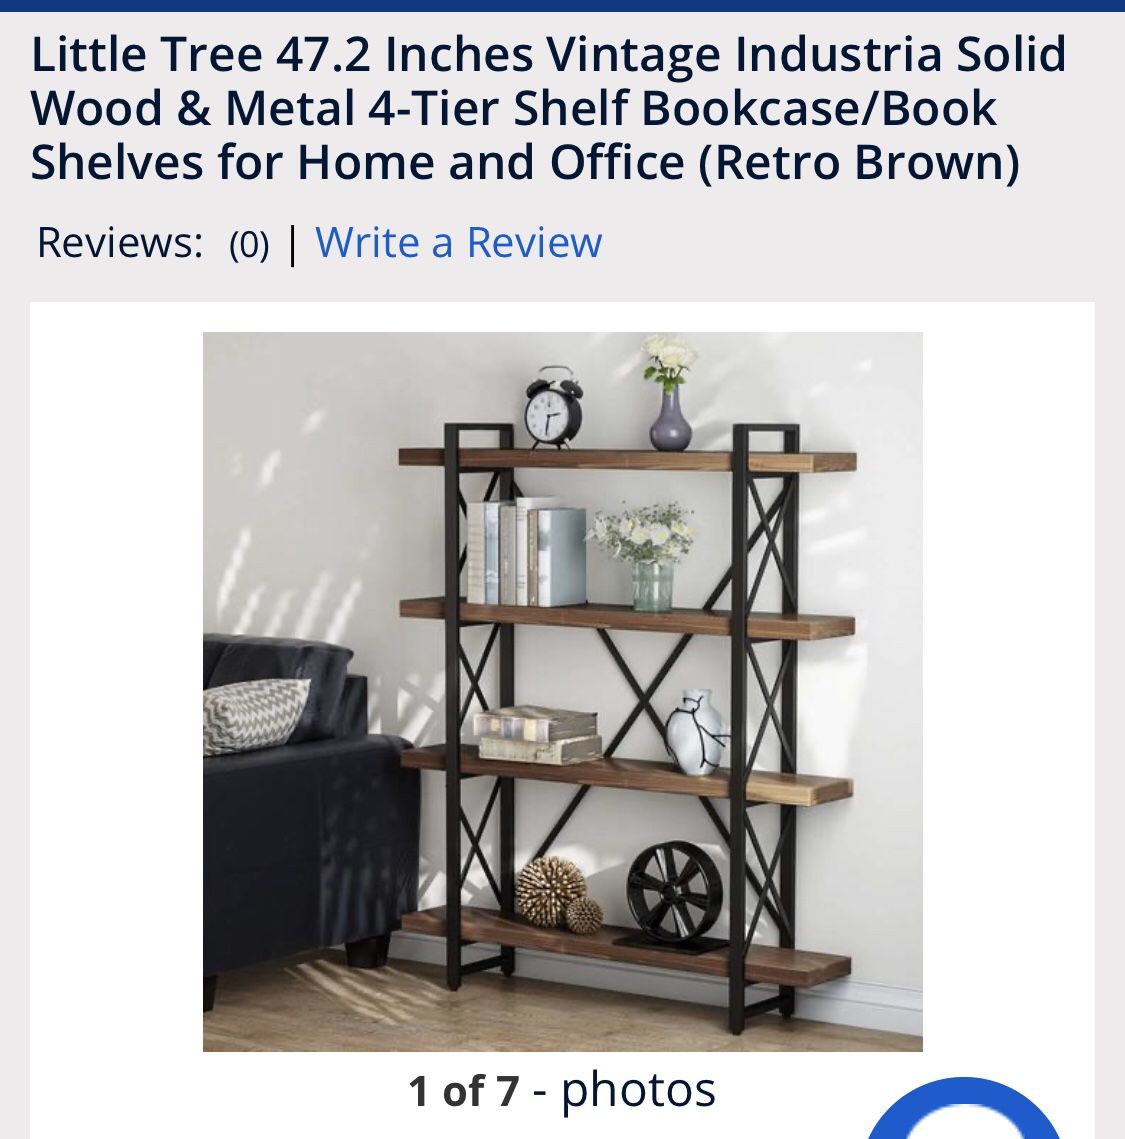 Little tree 47.2 inch vintage industrial solid wood & metal 4-tier shelf bookcase/ bookshelves for home or office ( Retro Brown) - new in the box